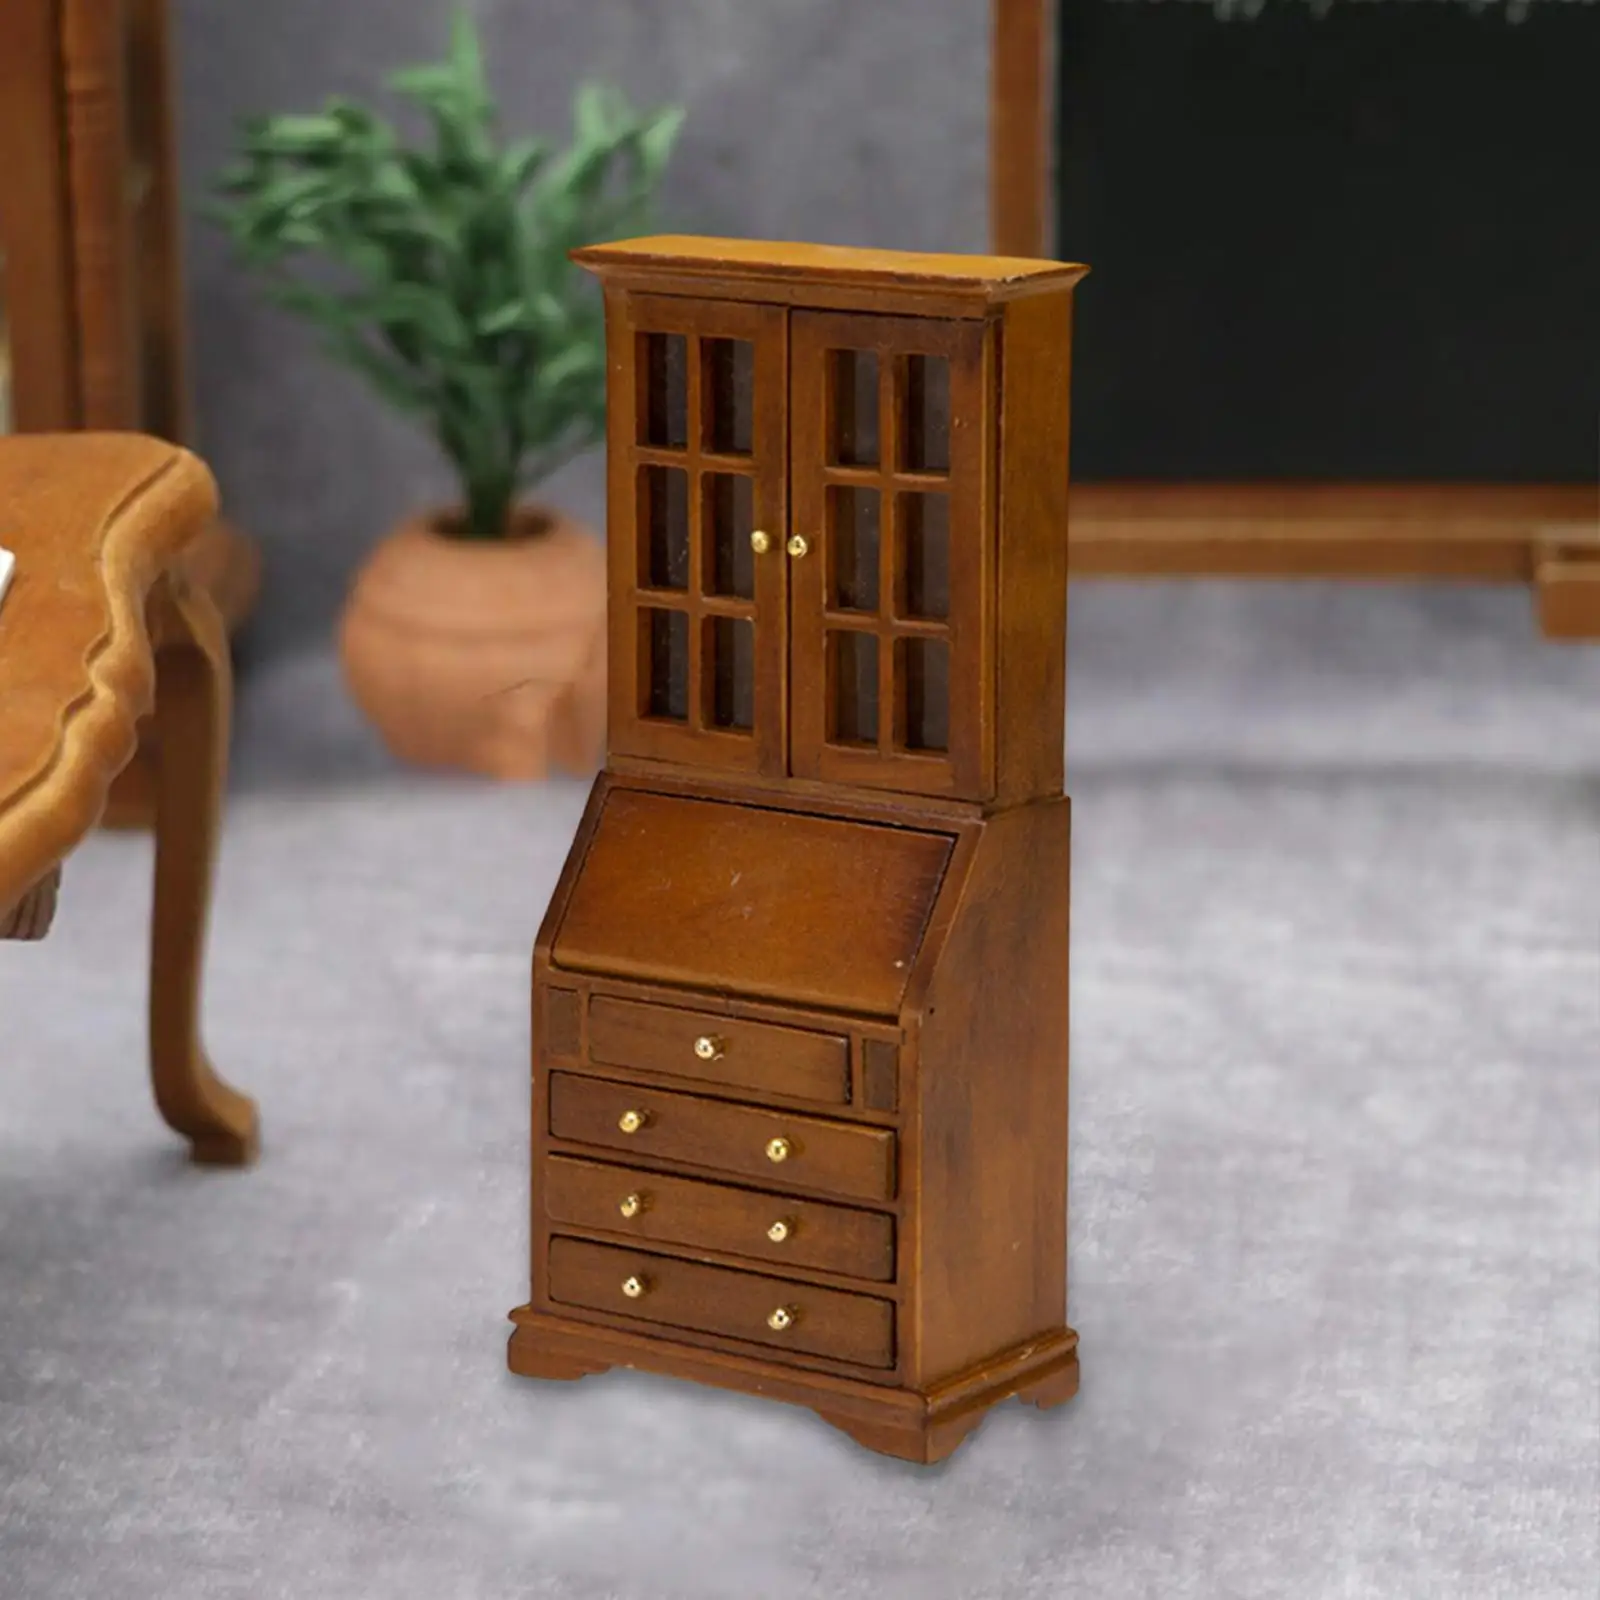 1/12 Dollhouse Bookcase with Drawers Miniature Wood Furniture 7x3.8x15.6cm